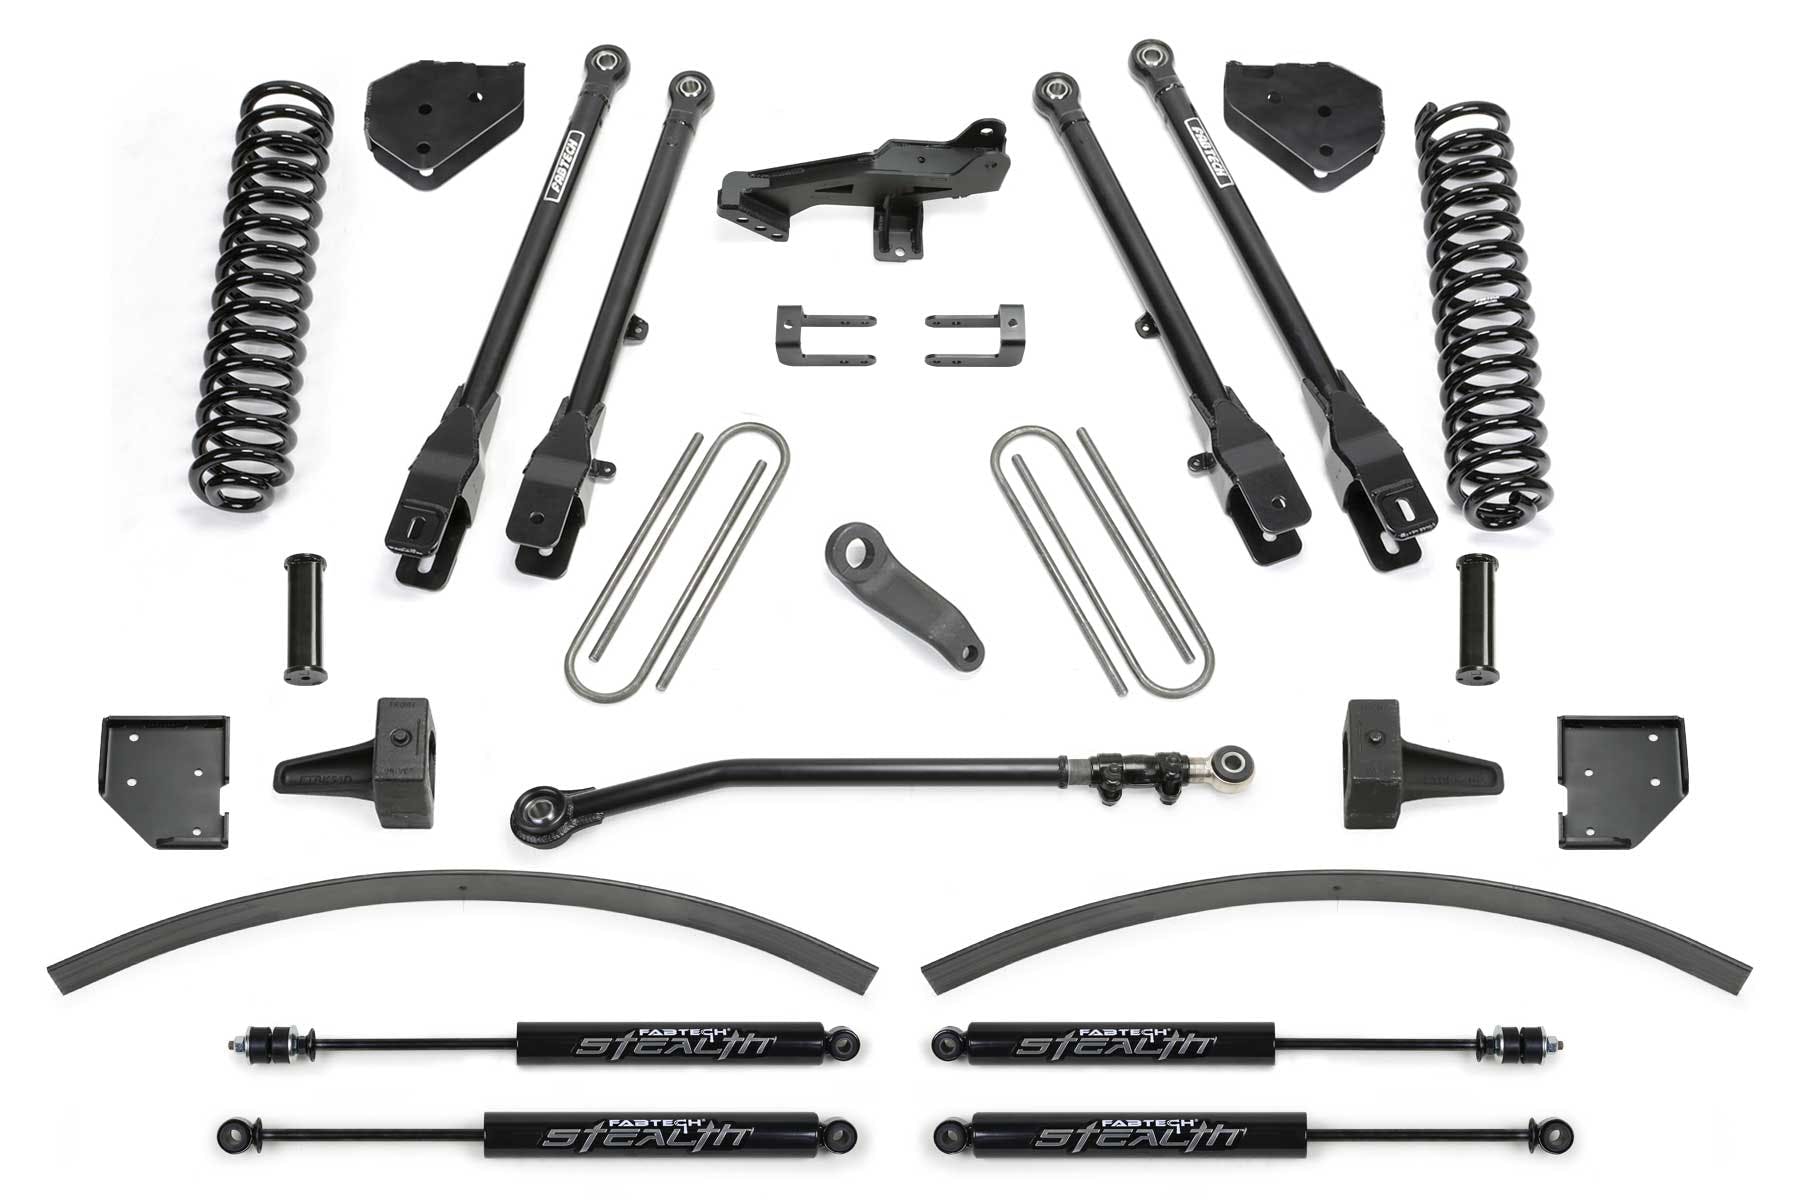 Fabtech K2266M 8in. 4LINK SYS W/COILS/STEALTH SHKS 17-18 FORD F250/F350 4WD DIESEL